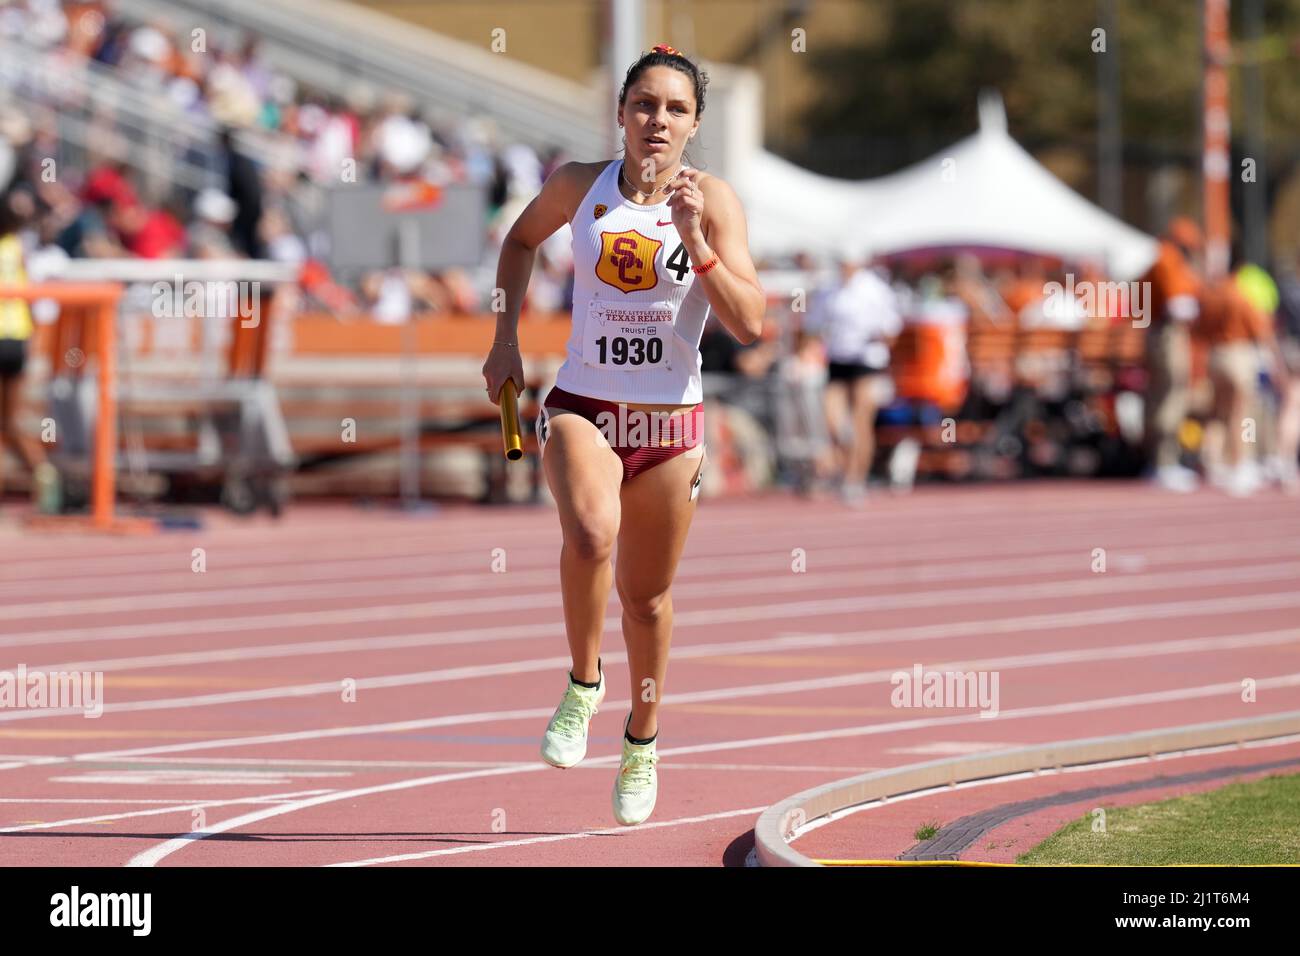 Gigi Maccagnini runs the second leg on the Southern California Trojans womens 4 x 800m relay that placed third in 838.89during the 94th Clyde Littlefield Texas Relays, Saturday, Mar